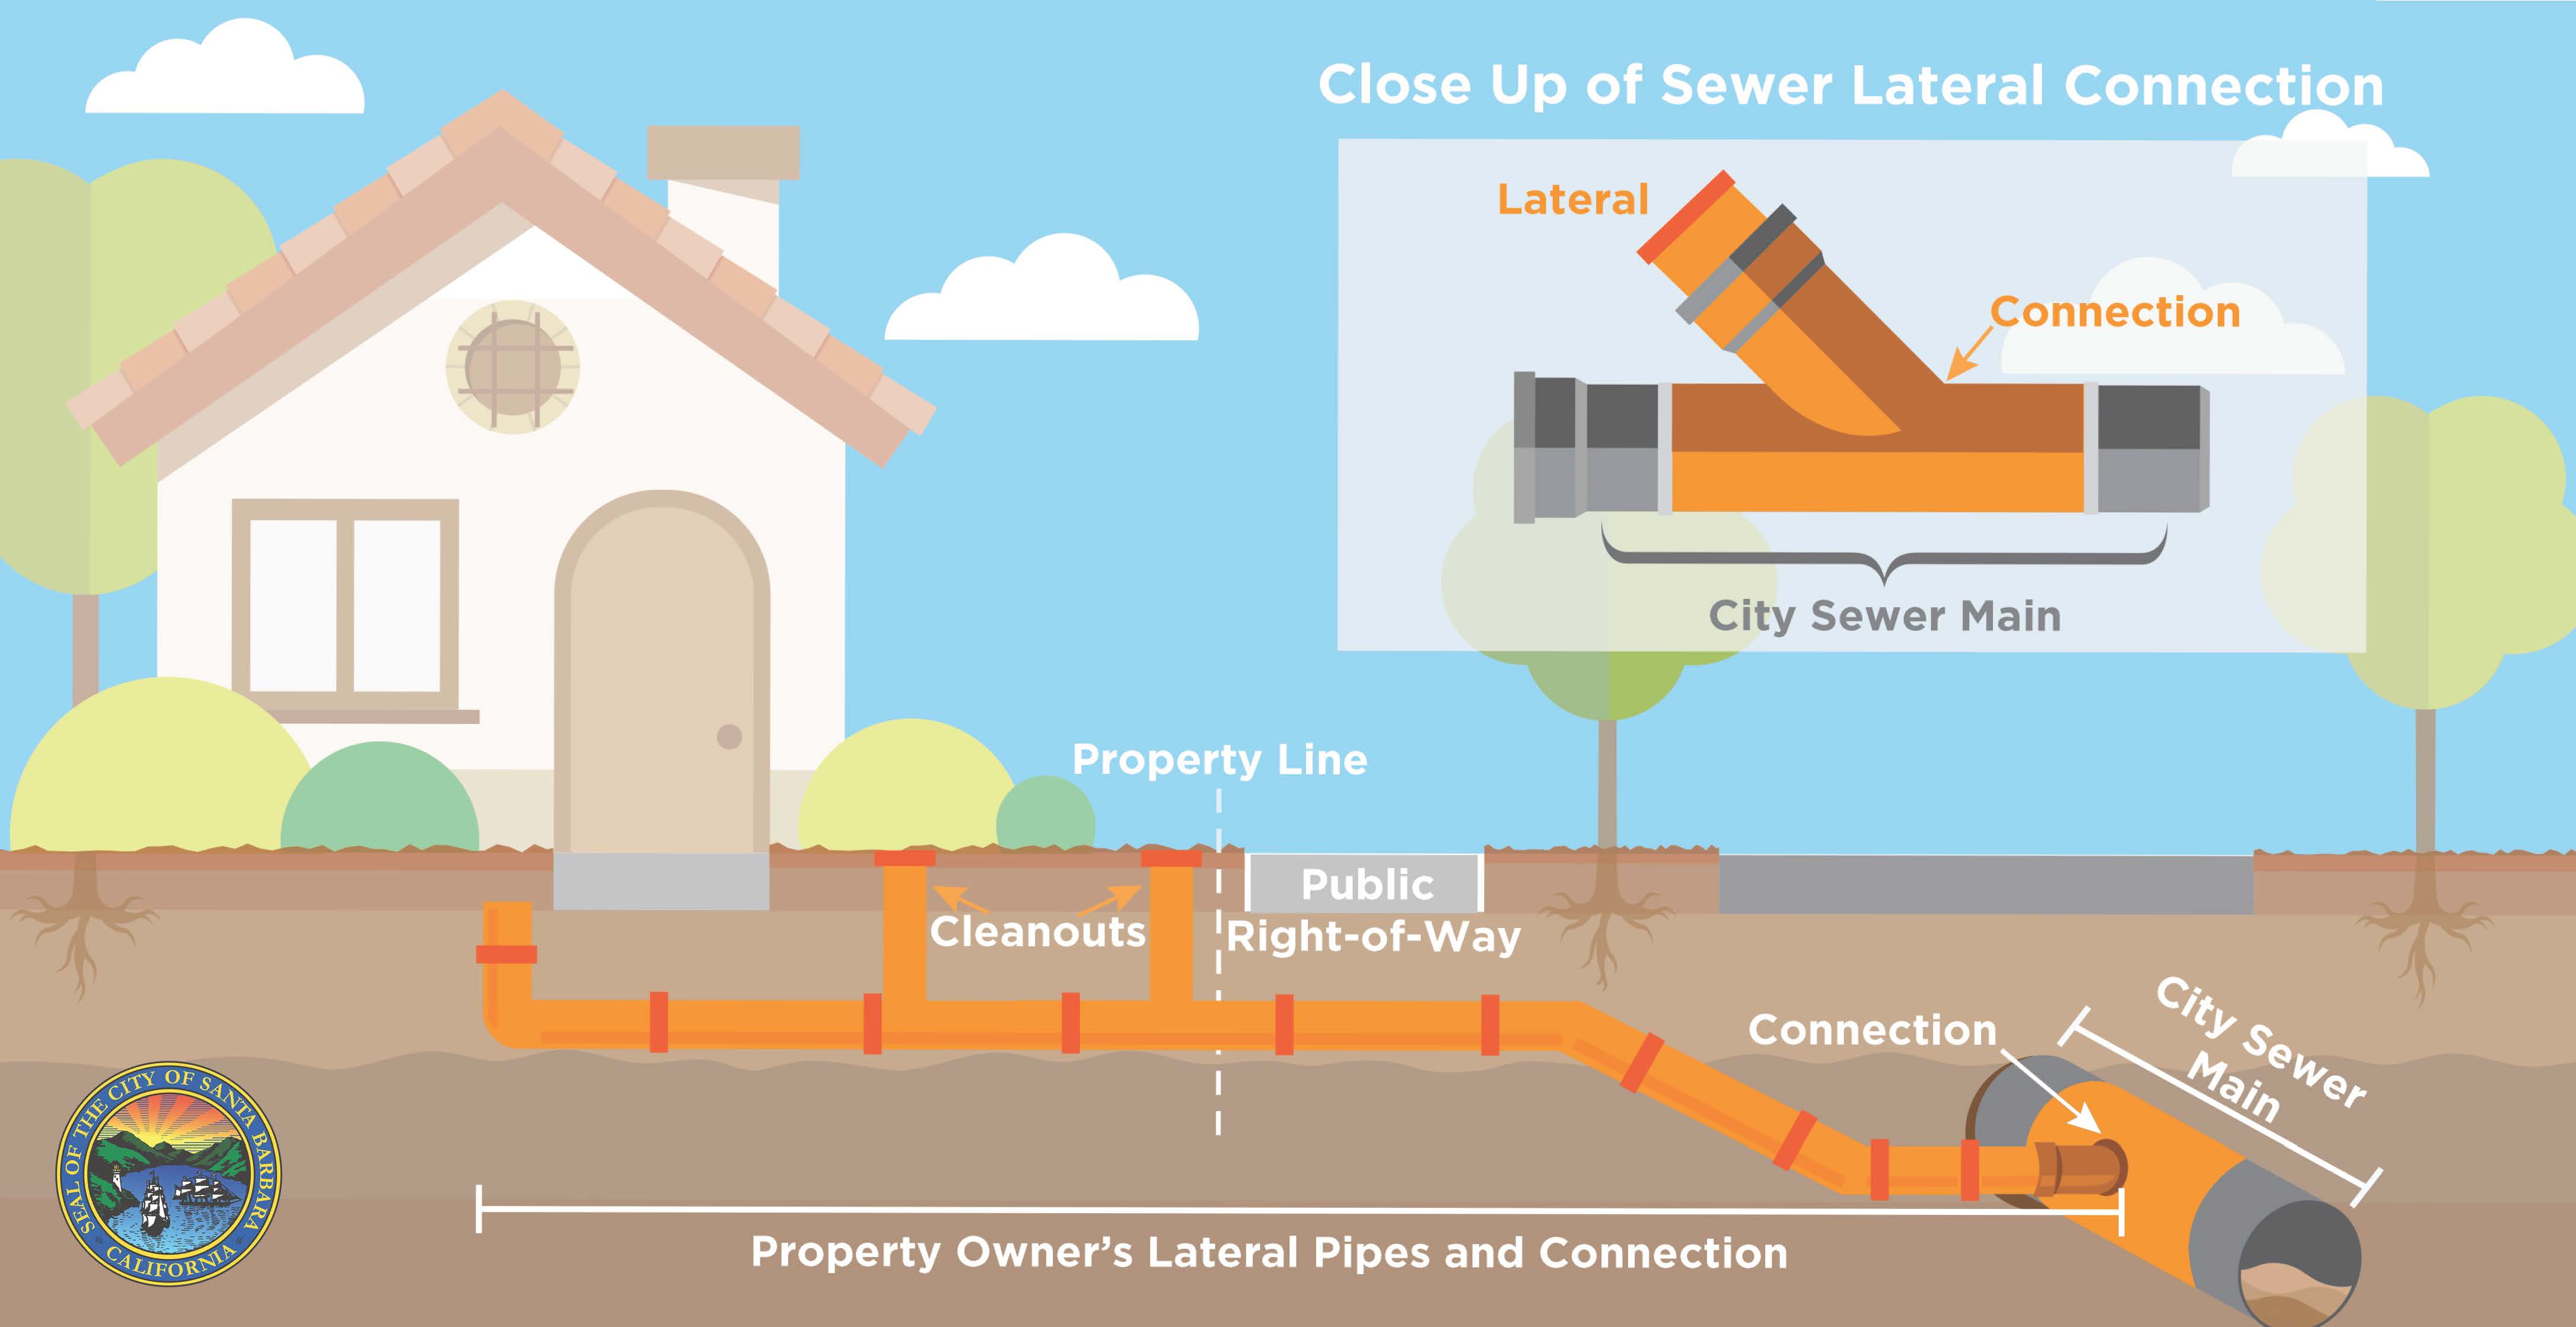 Close Up of Sewer Lateral Connection